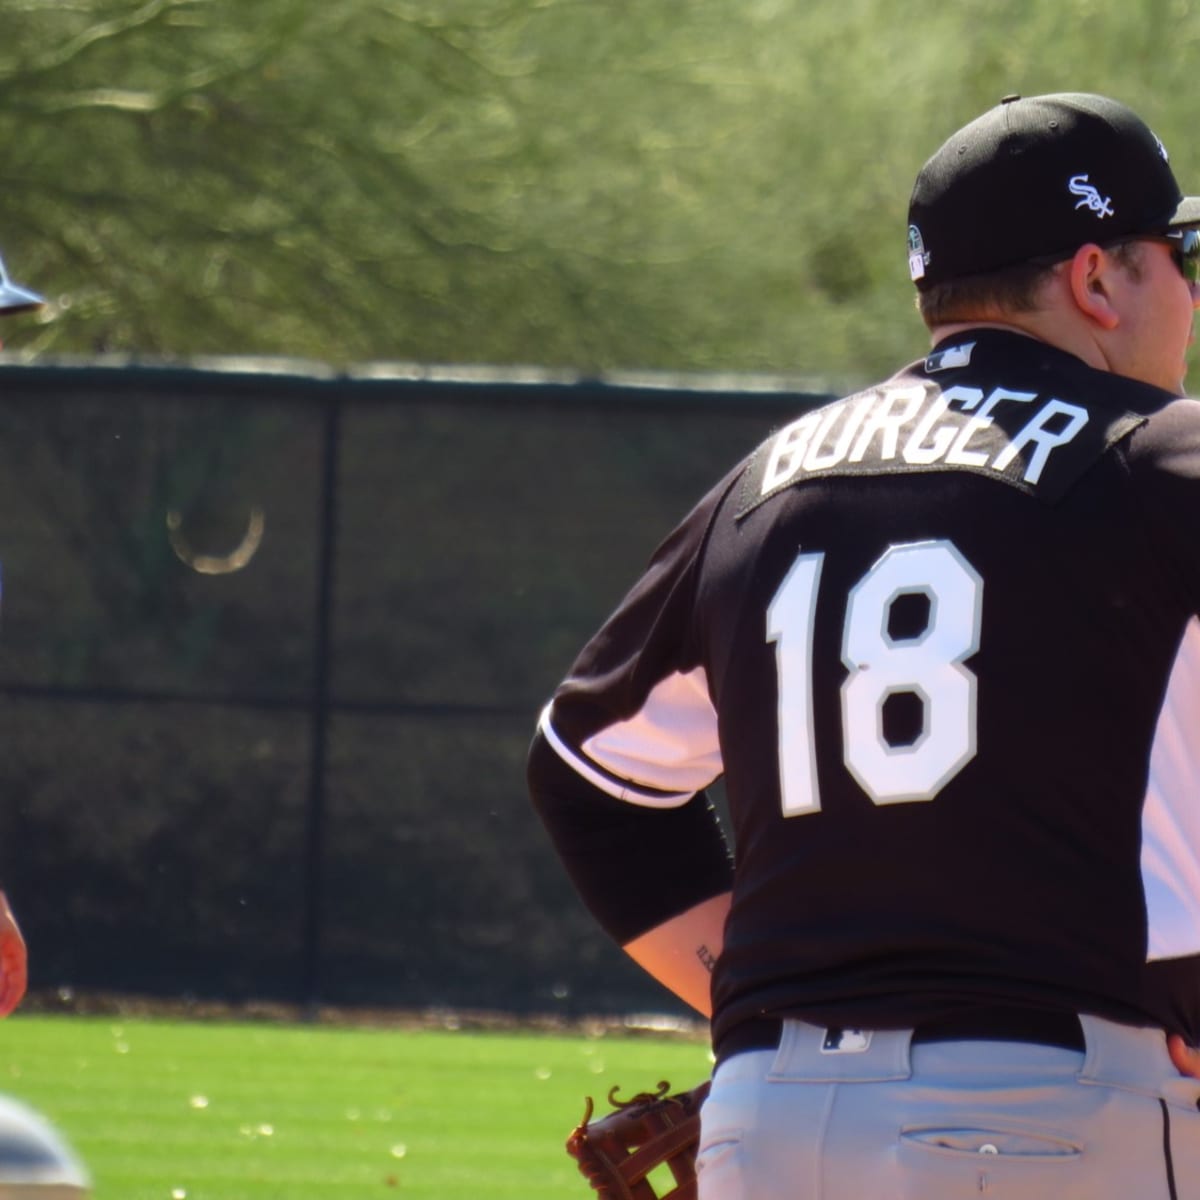 Jake Burger is ready for another fresh season with the Chicago White Sox